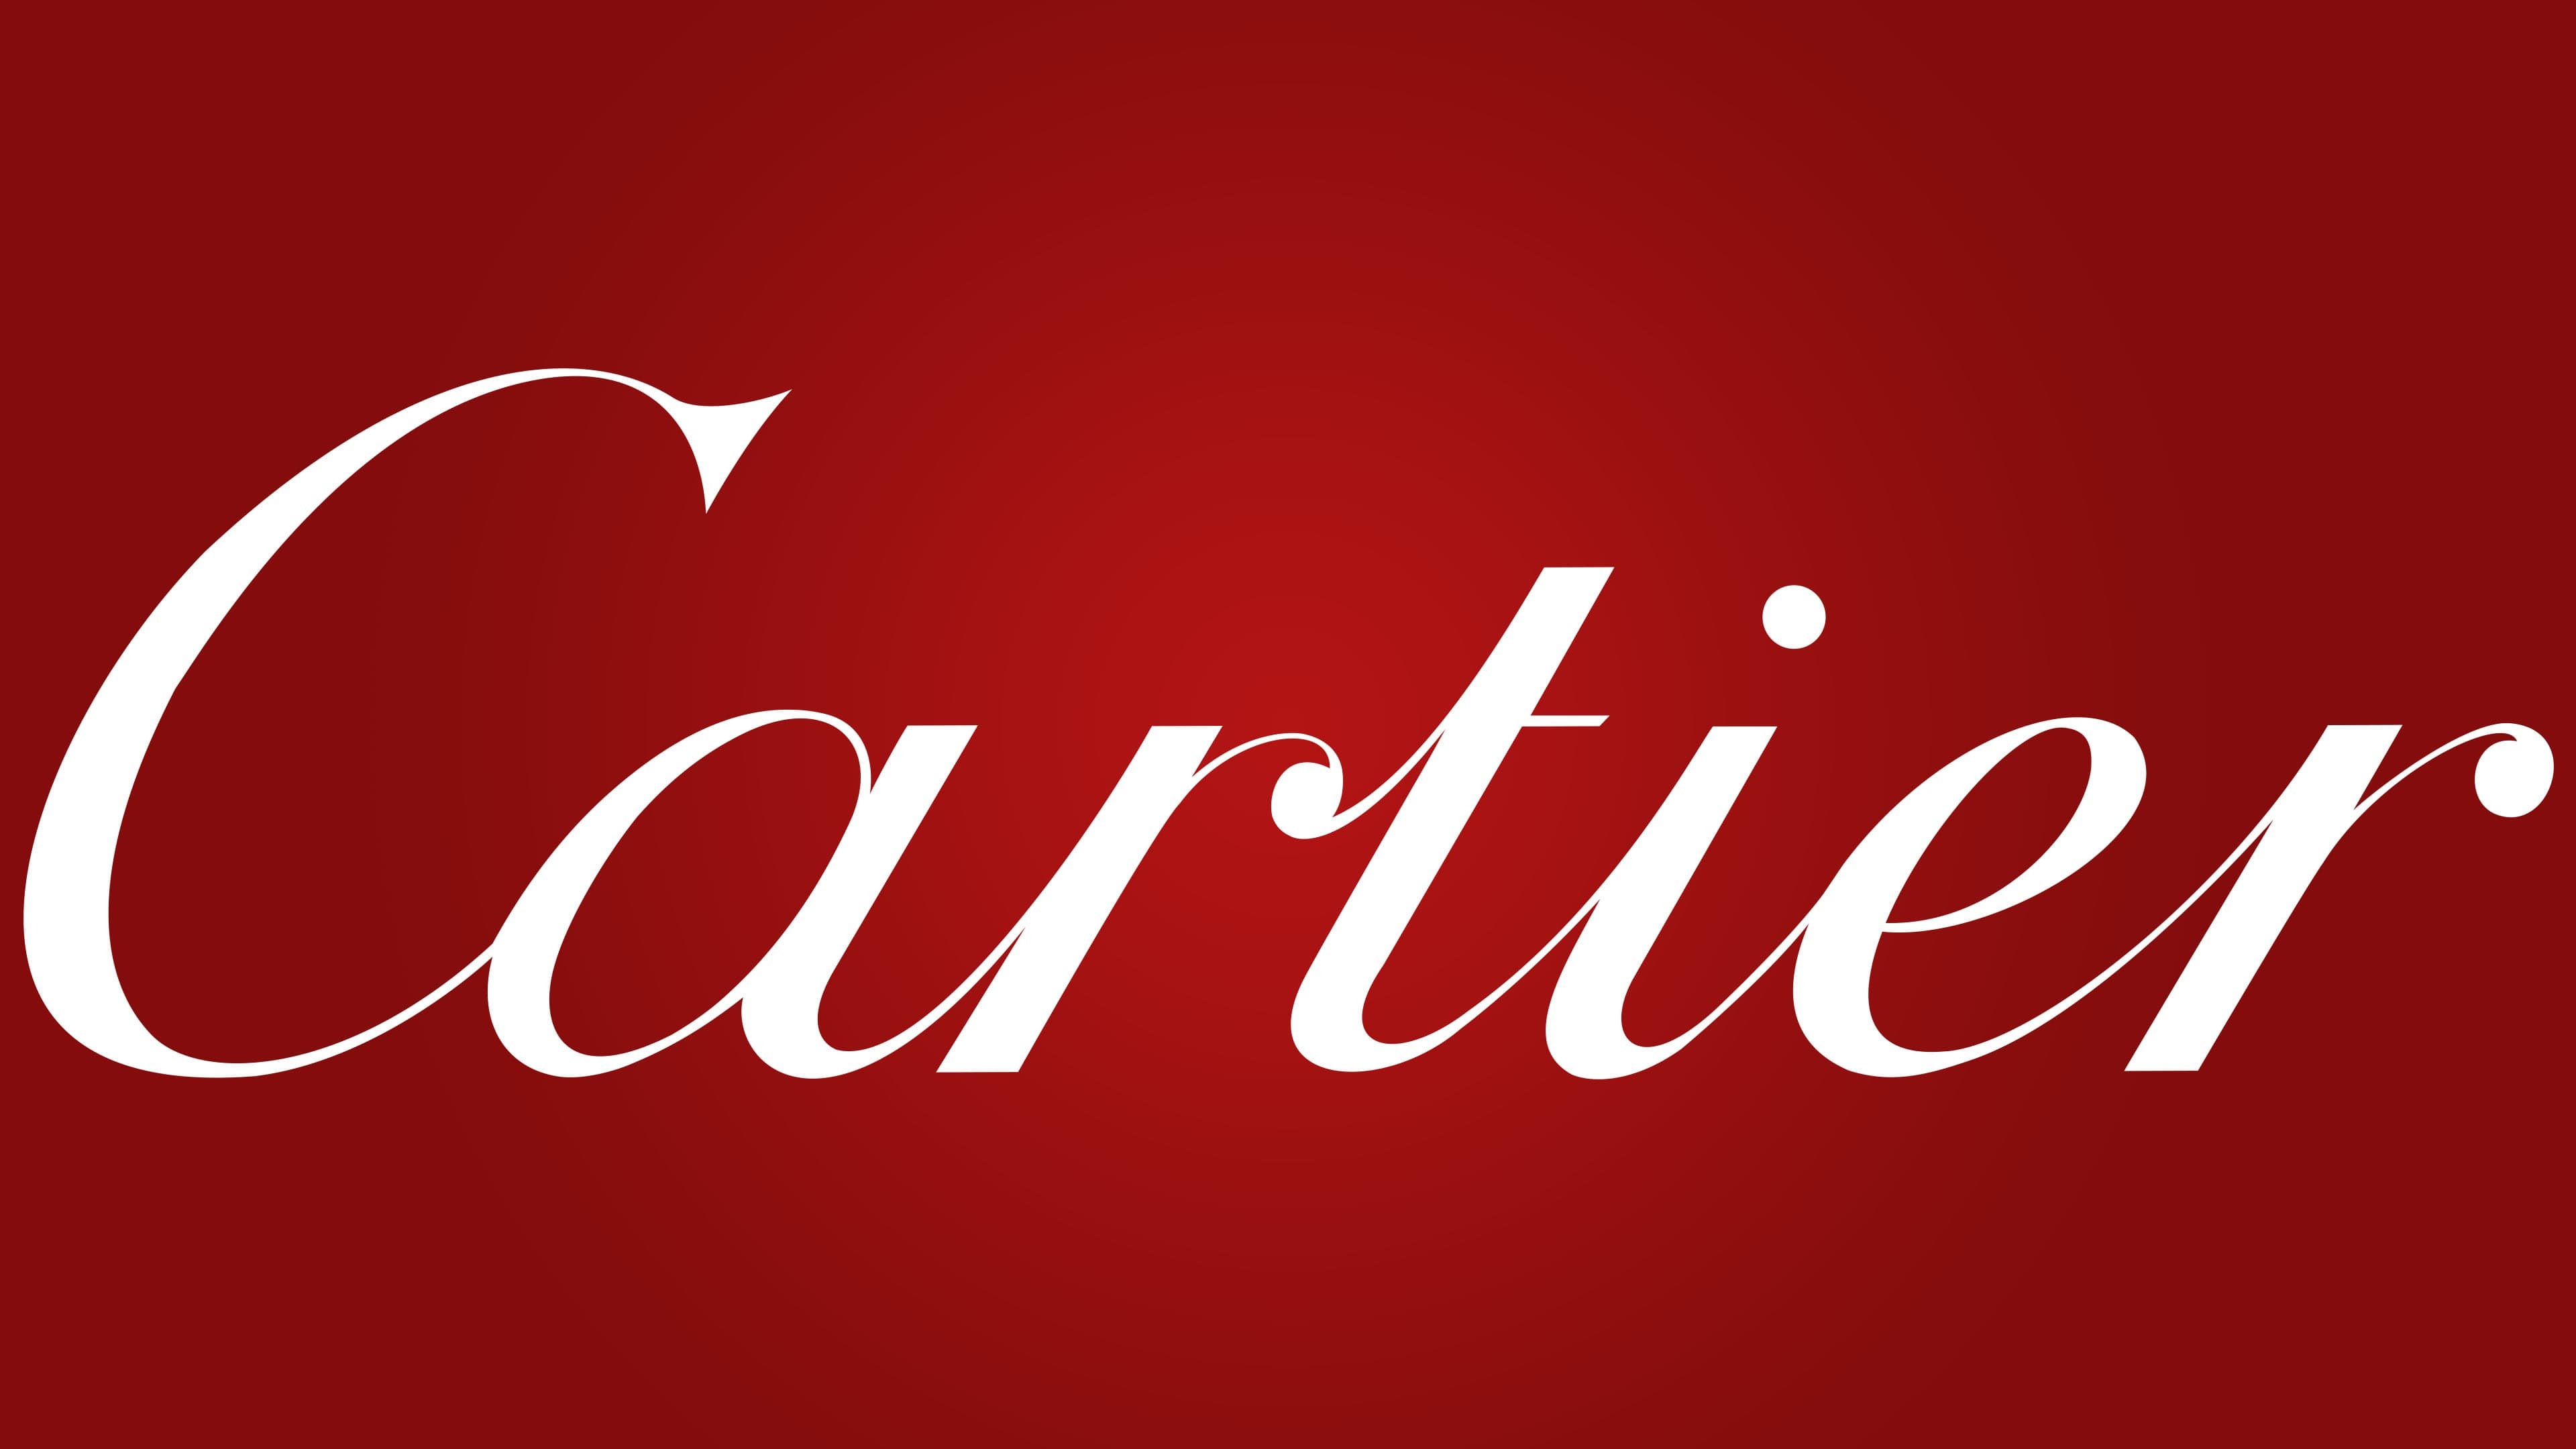 Cartier: One of the world's leading luxury goods companies, Louis-Francois Cartier, A watchmaker. 3840x2160 4K Background.